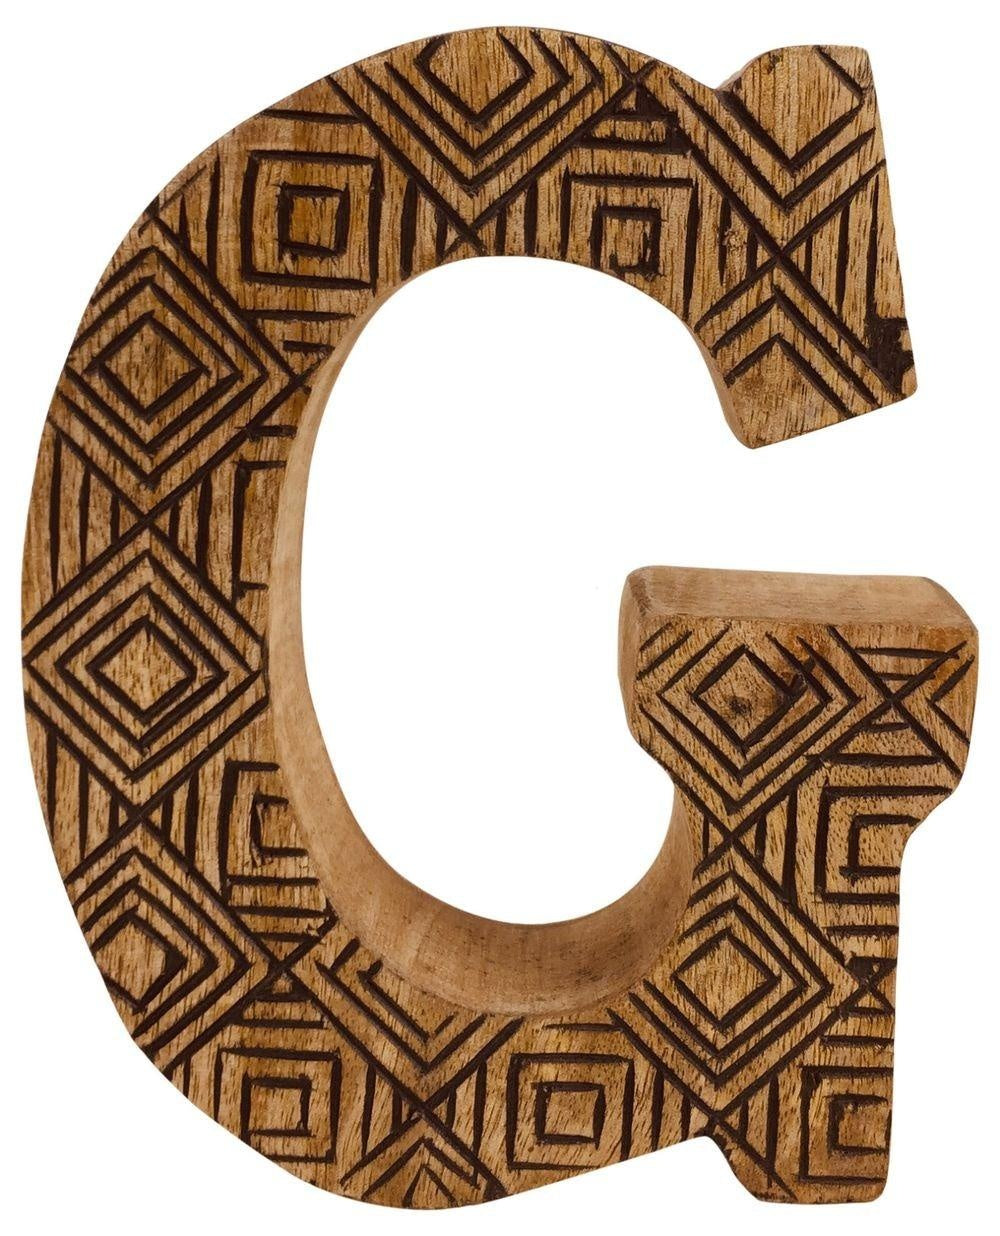 Hand Carved Wooden Geometric Letter G